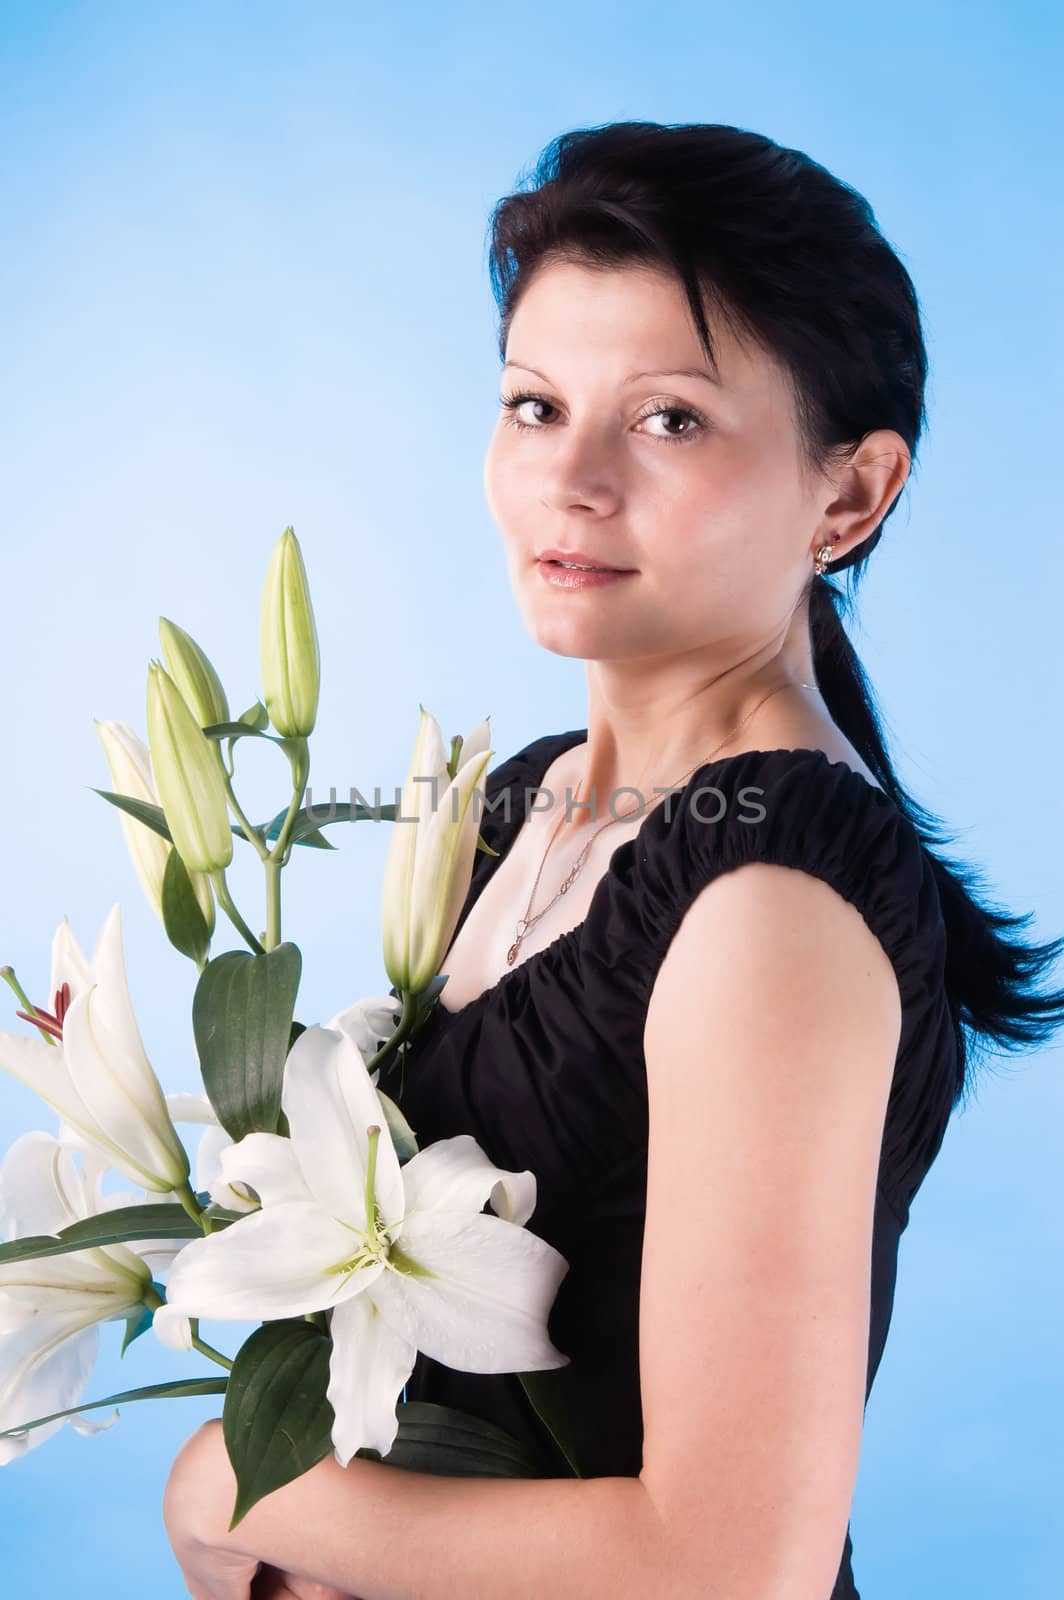 The attractive woman with a bouquet of lilies. by andyphoto